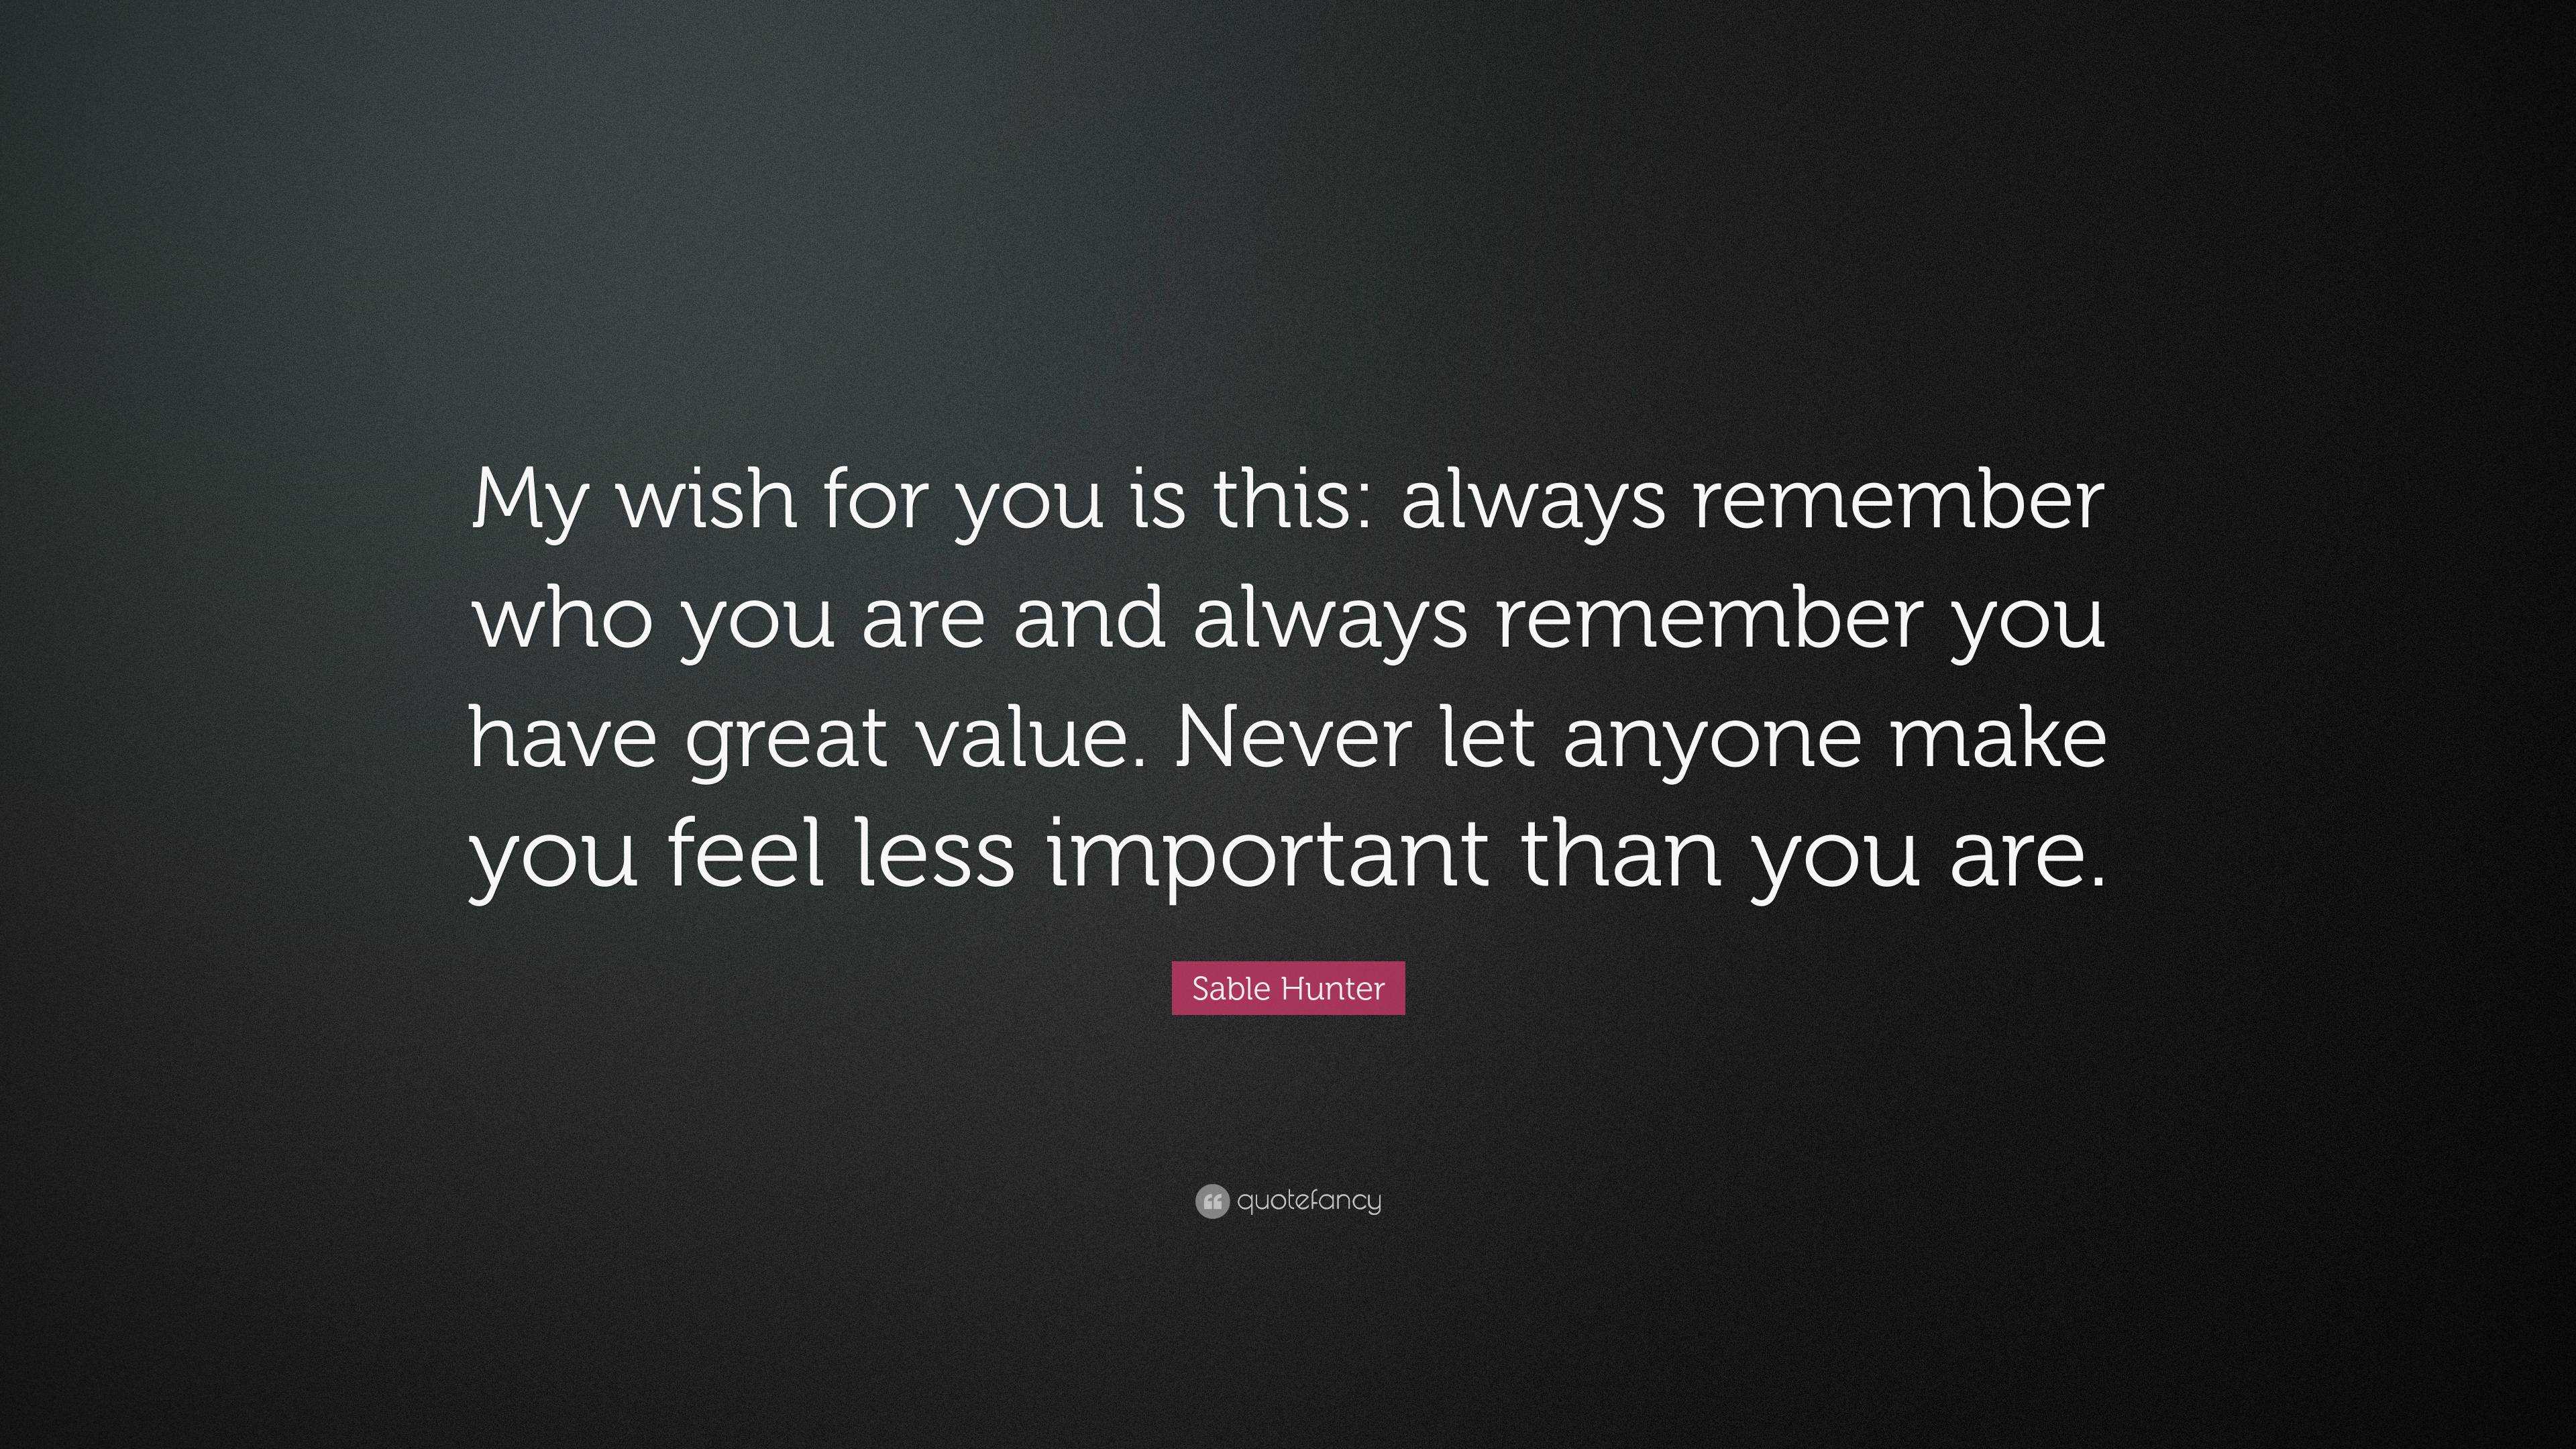 https://quotefancy.com/media/wallpaper/3840x2160/6735150-Sable-Hunter-Quote-My-wish-for-you-is-this-always-remember-who-you.jpg